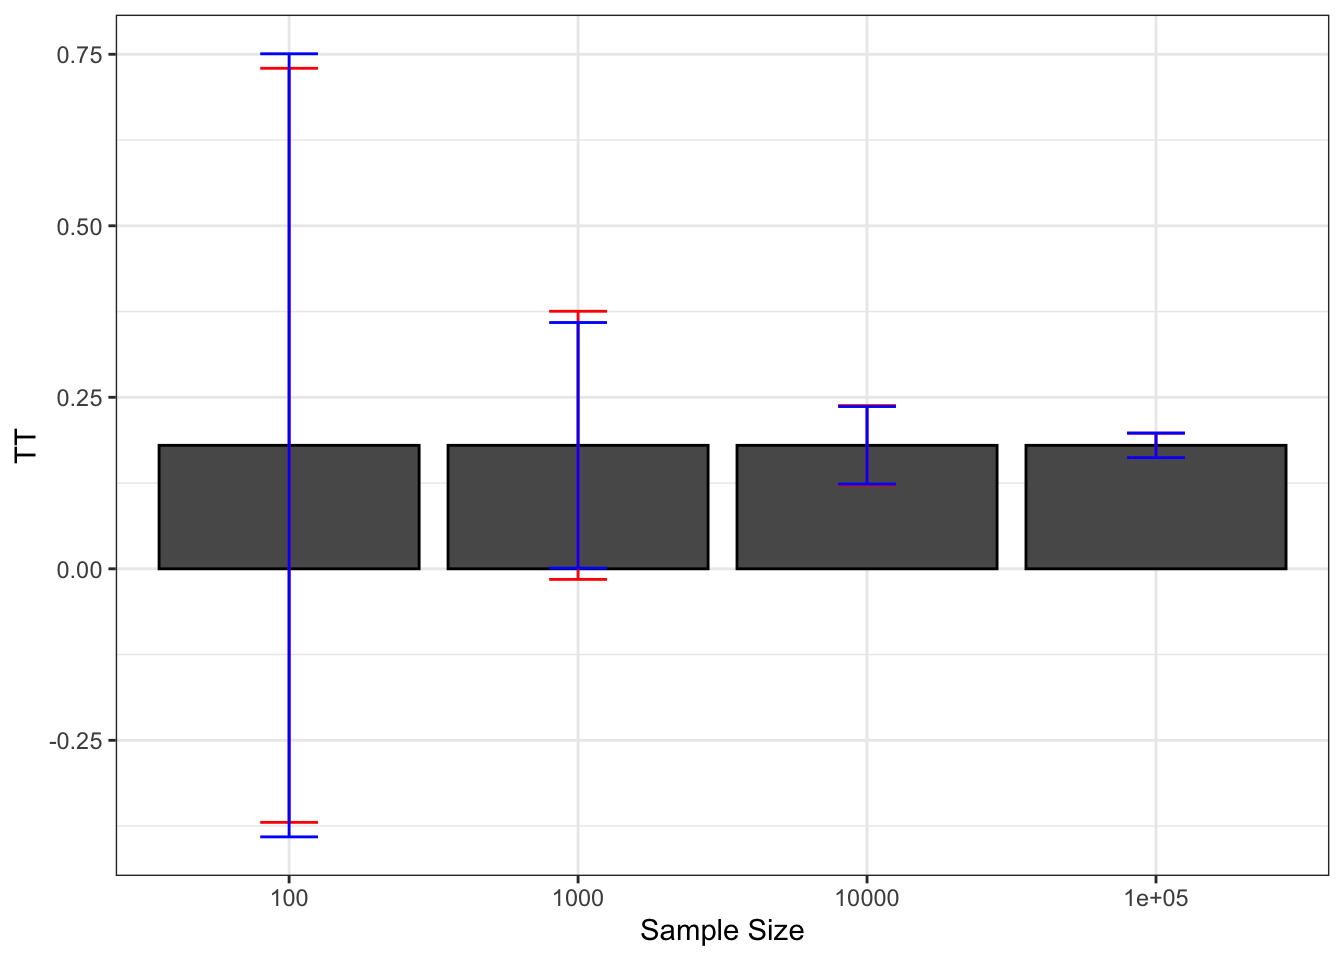 Average CLT-based approximations of sampling noise over replications of samples of different sizes (true sampling noise in red)